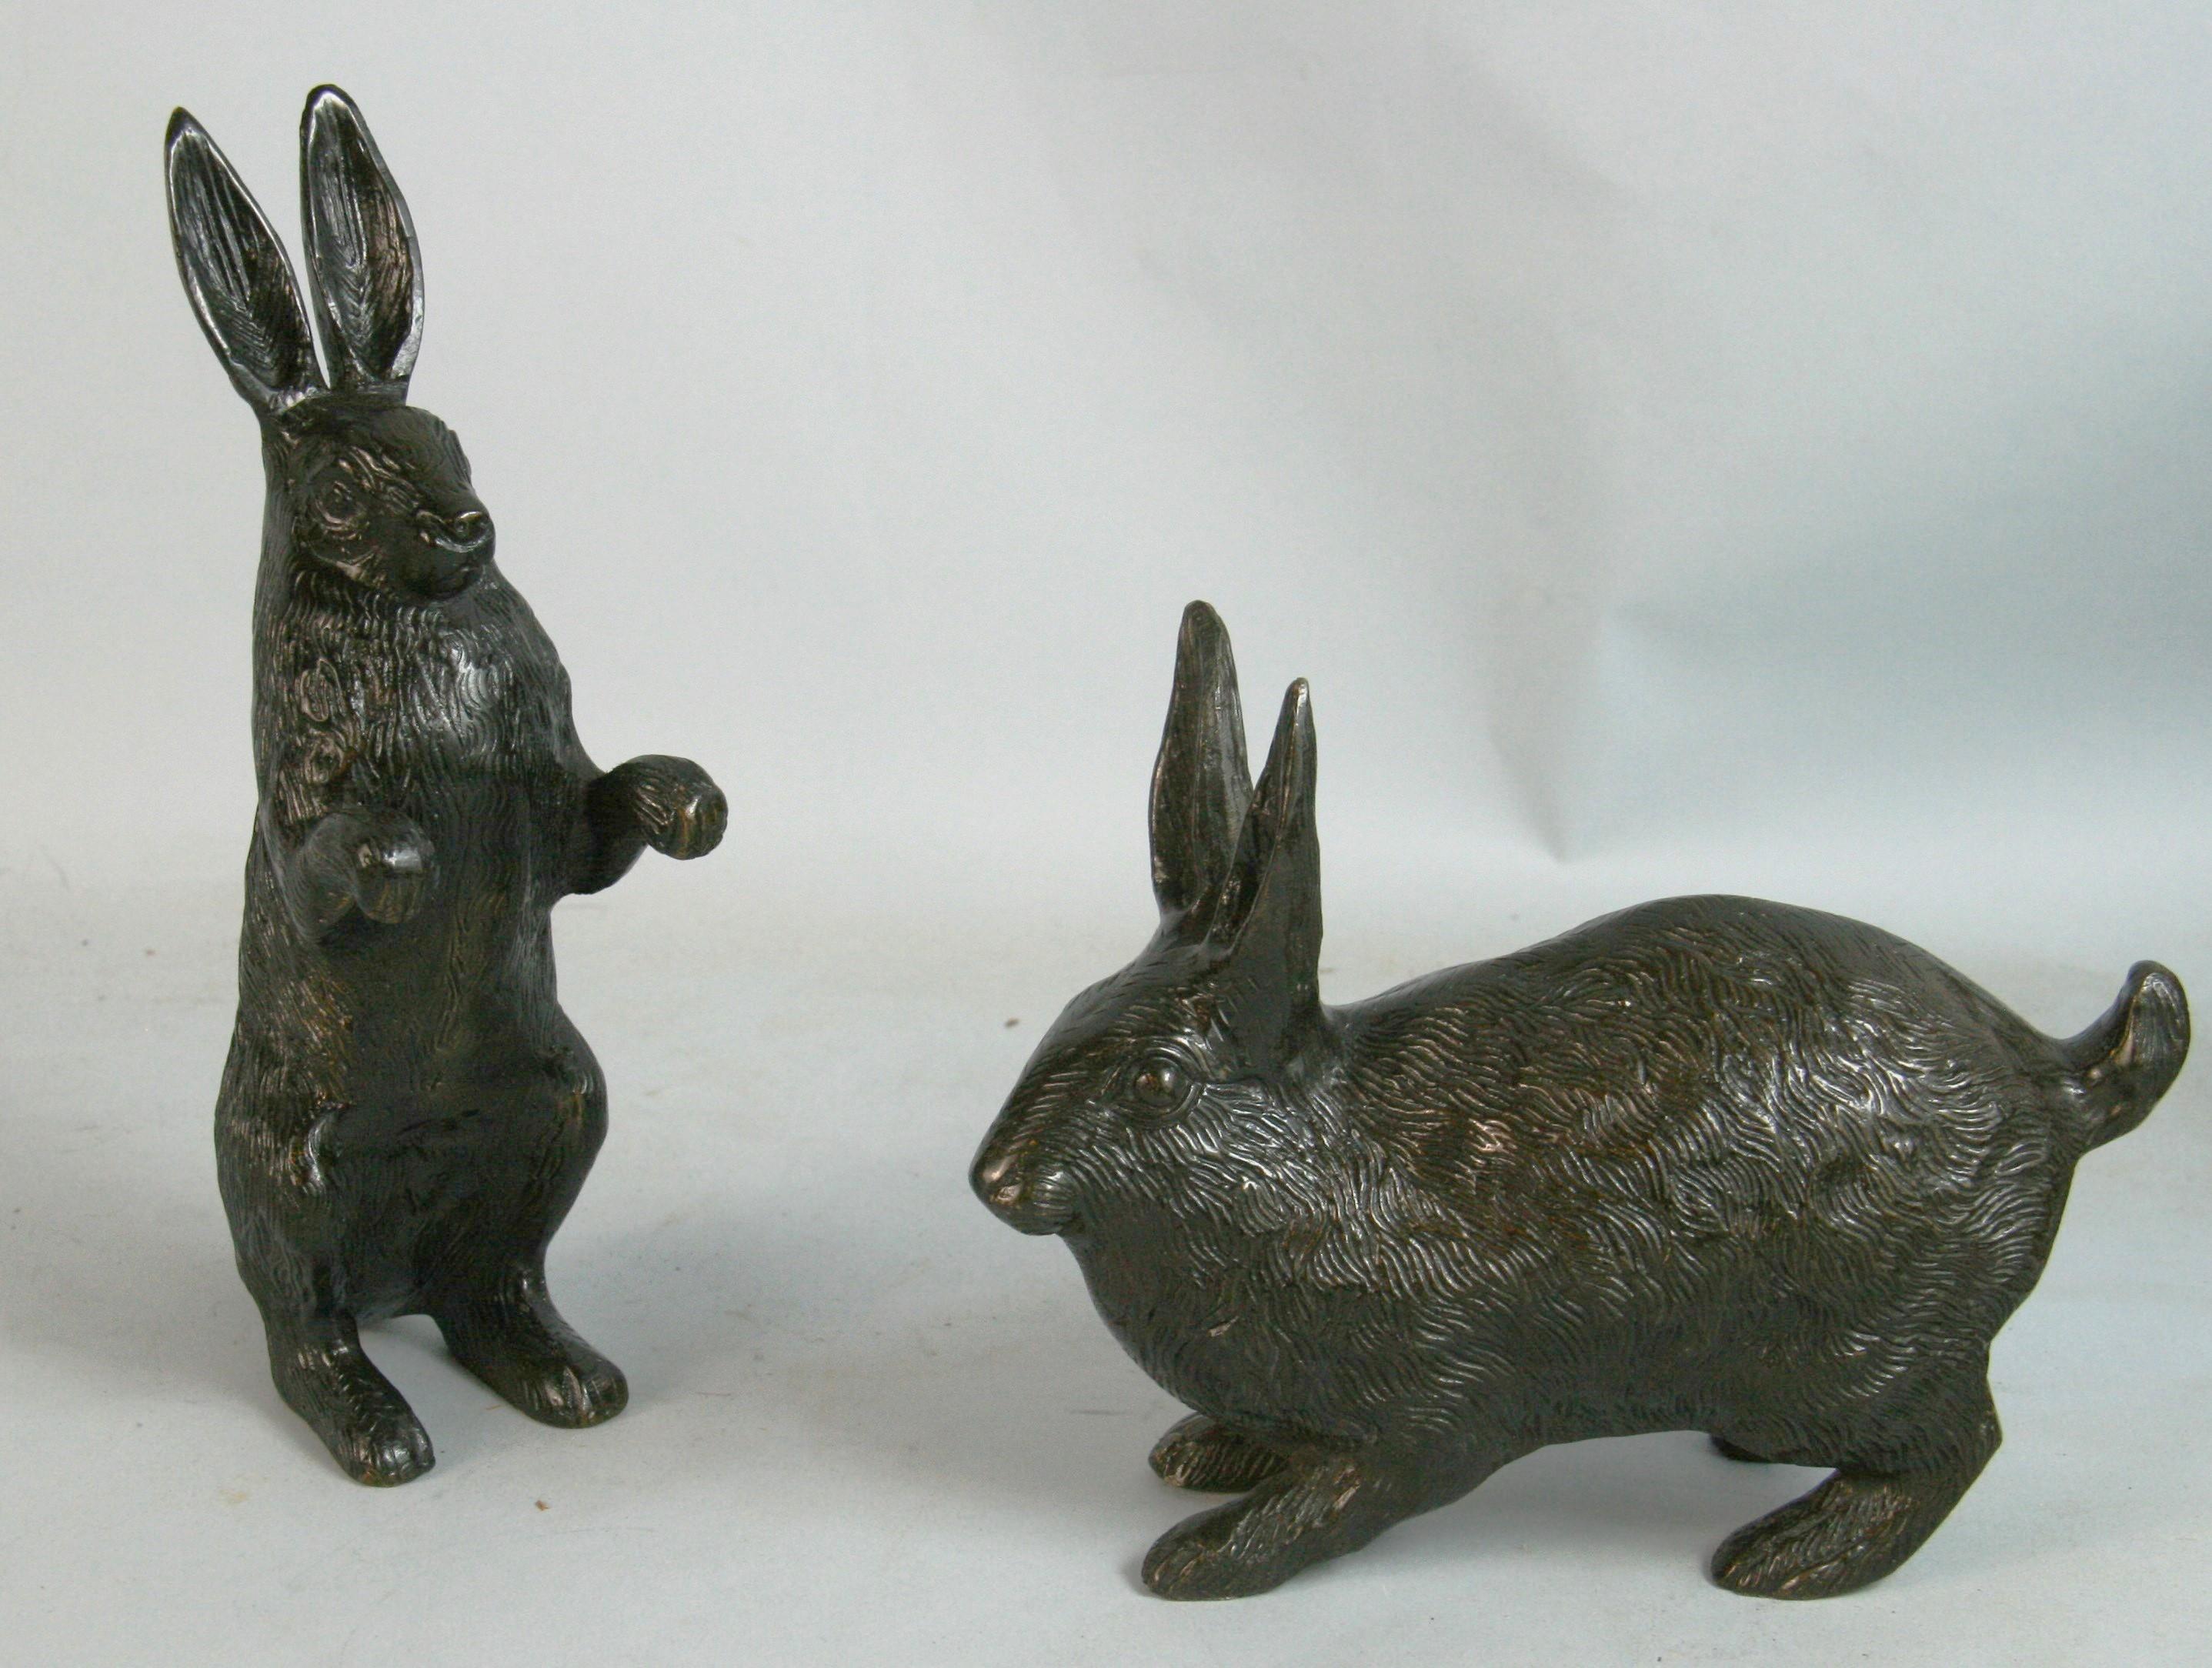 1577 Pair of hand cast bronze garden rabbits one stand and the other crouching
Its fine detailed 